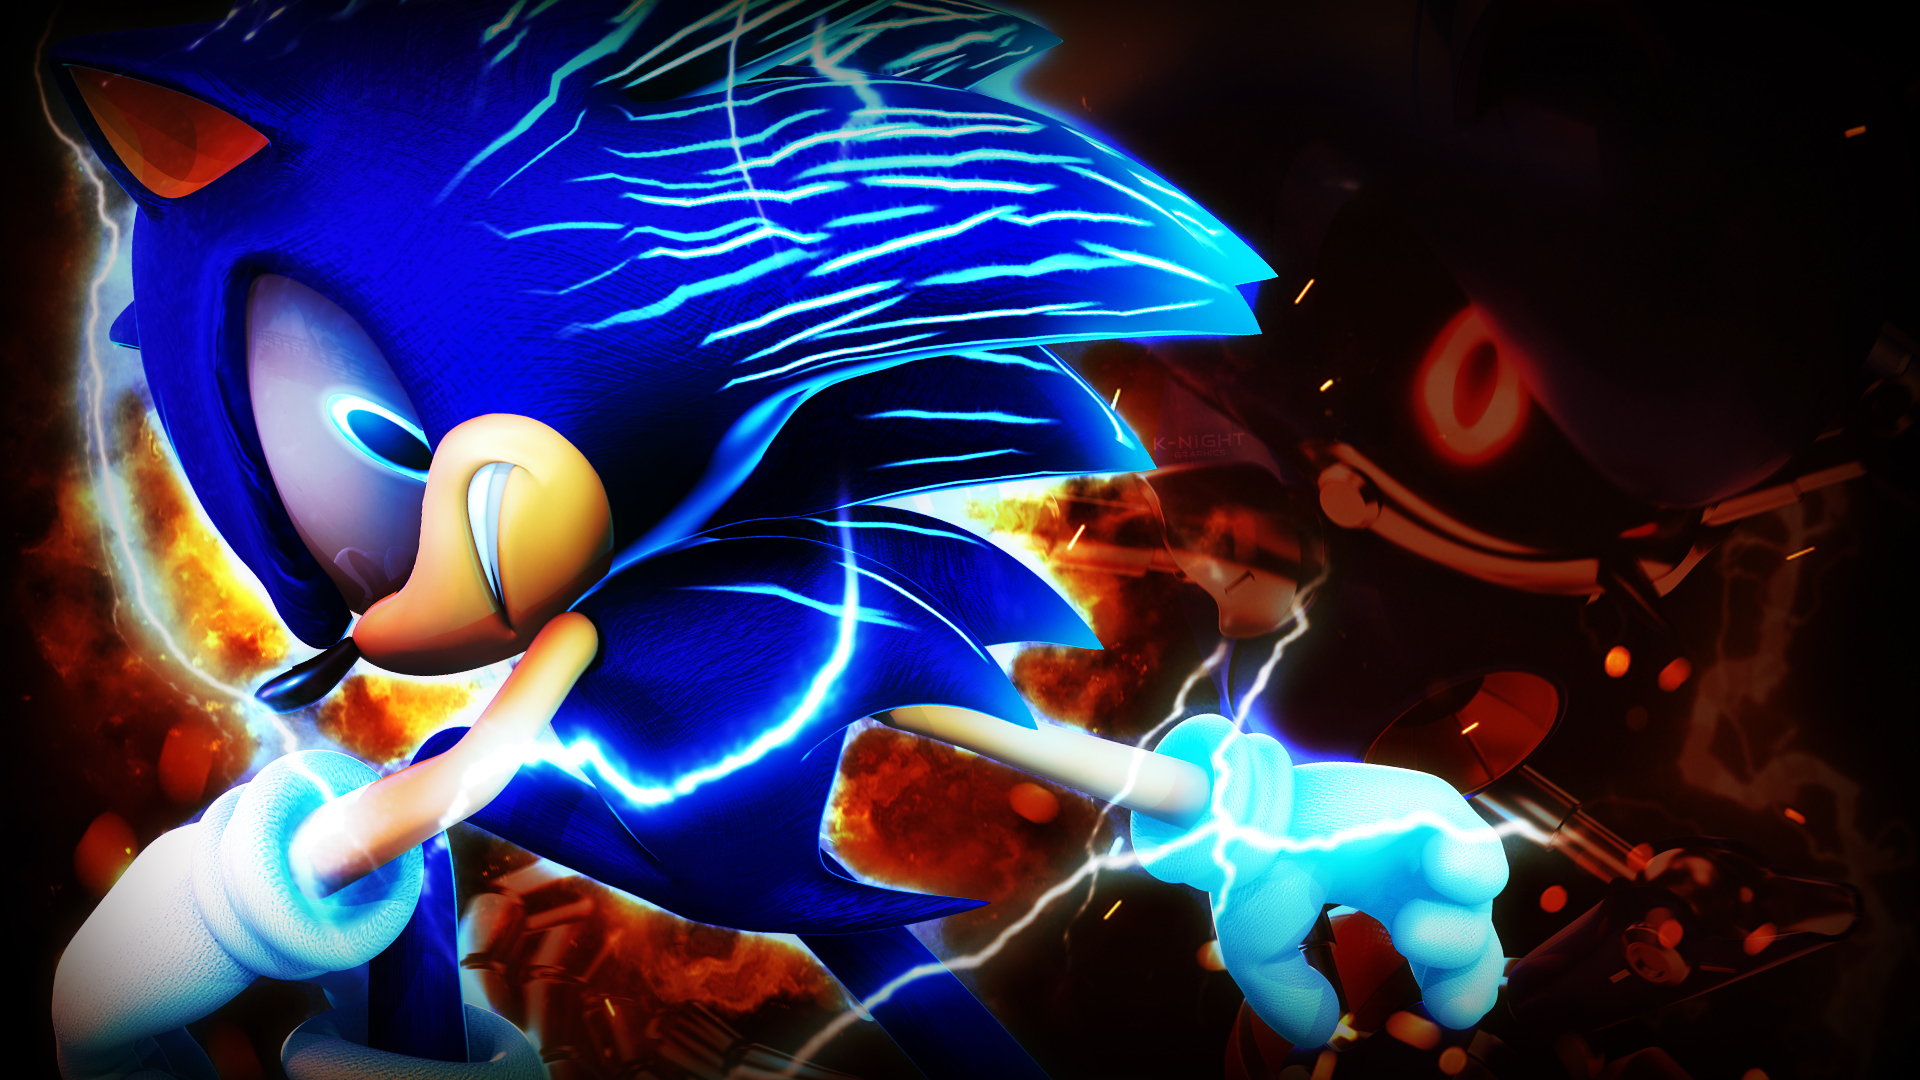 Sonic the Hedgehog vs Metal Sonic by JackTheKnight